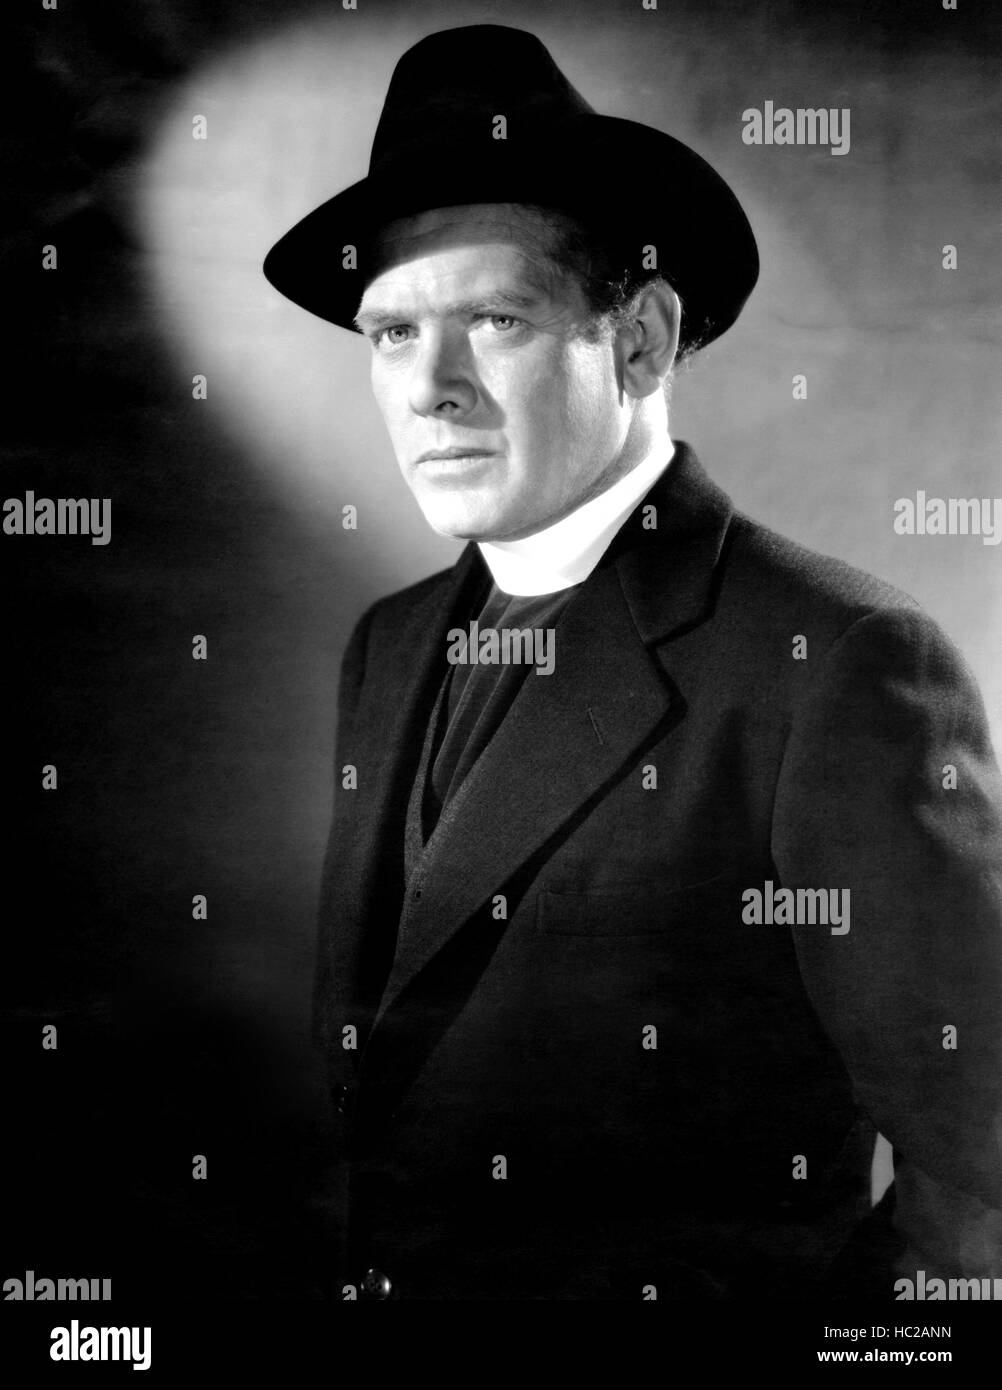 MUTINY IN THE BIG HOUSE, Charles Bickford, 1939 Stock Photo - Alamy